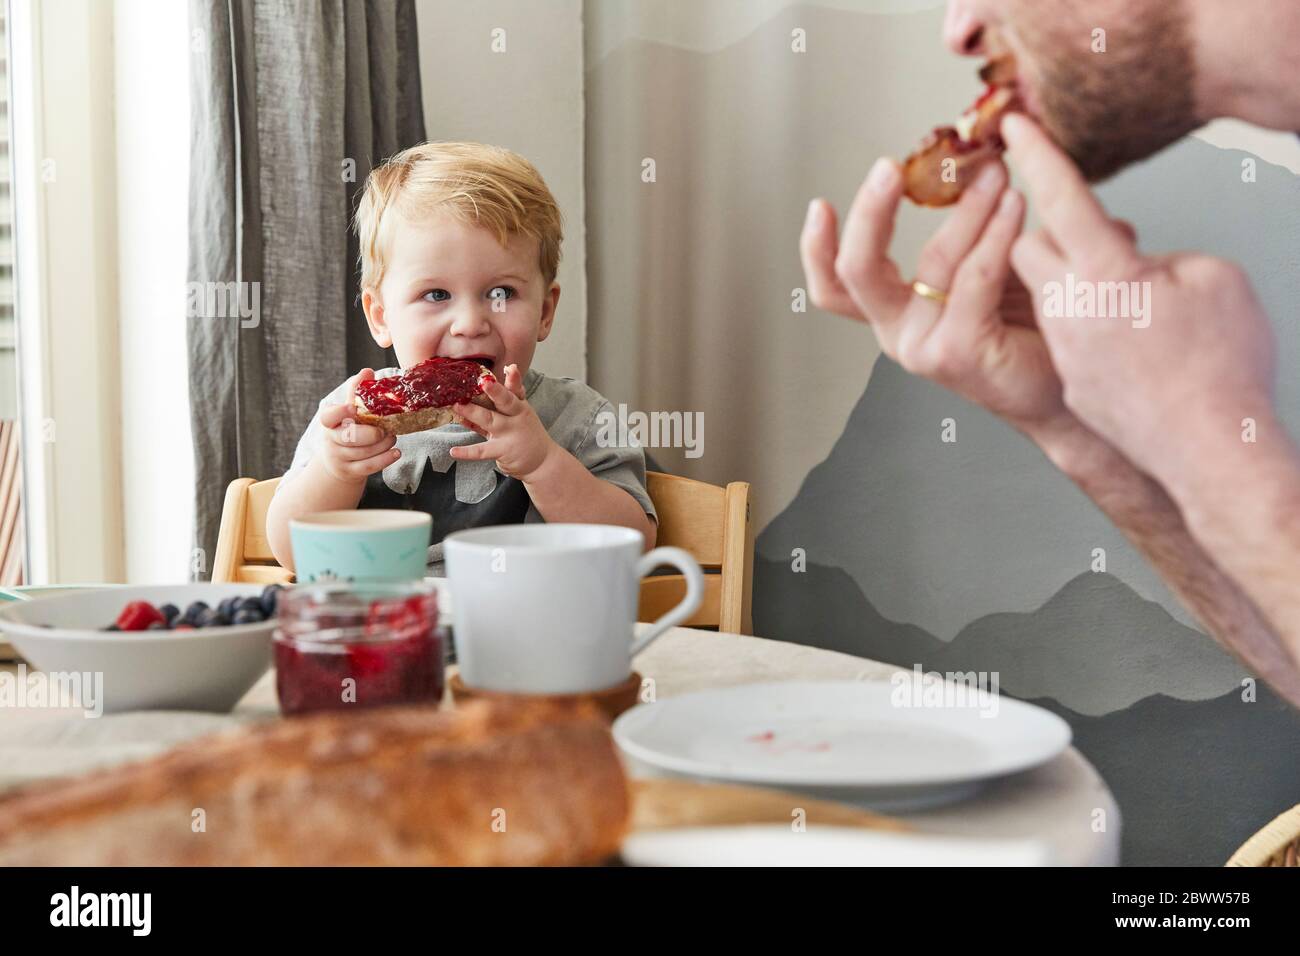 Portrait of little boy eating bread with jam watching his father Stock Photo